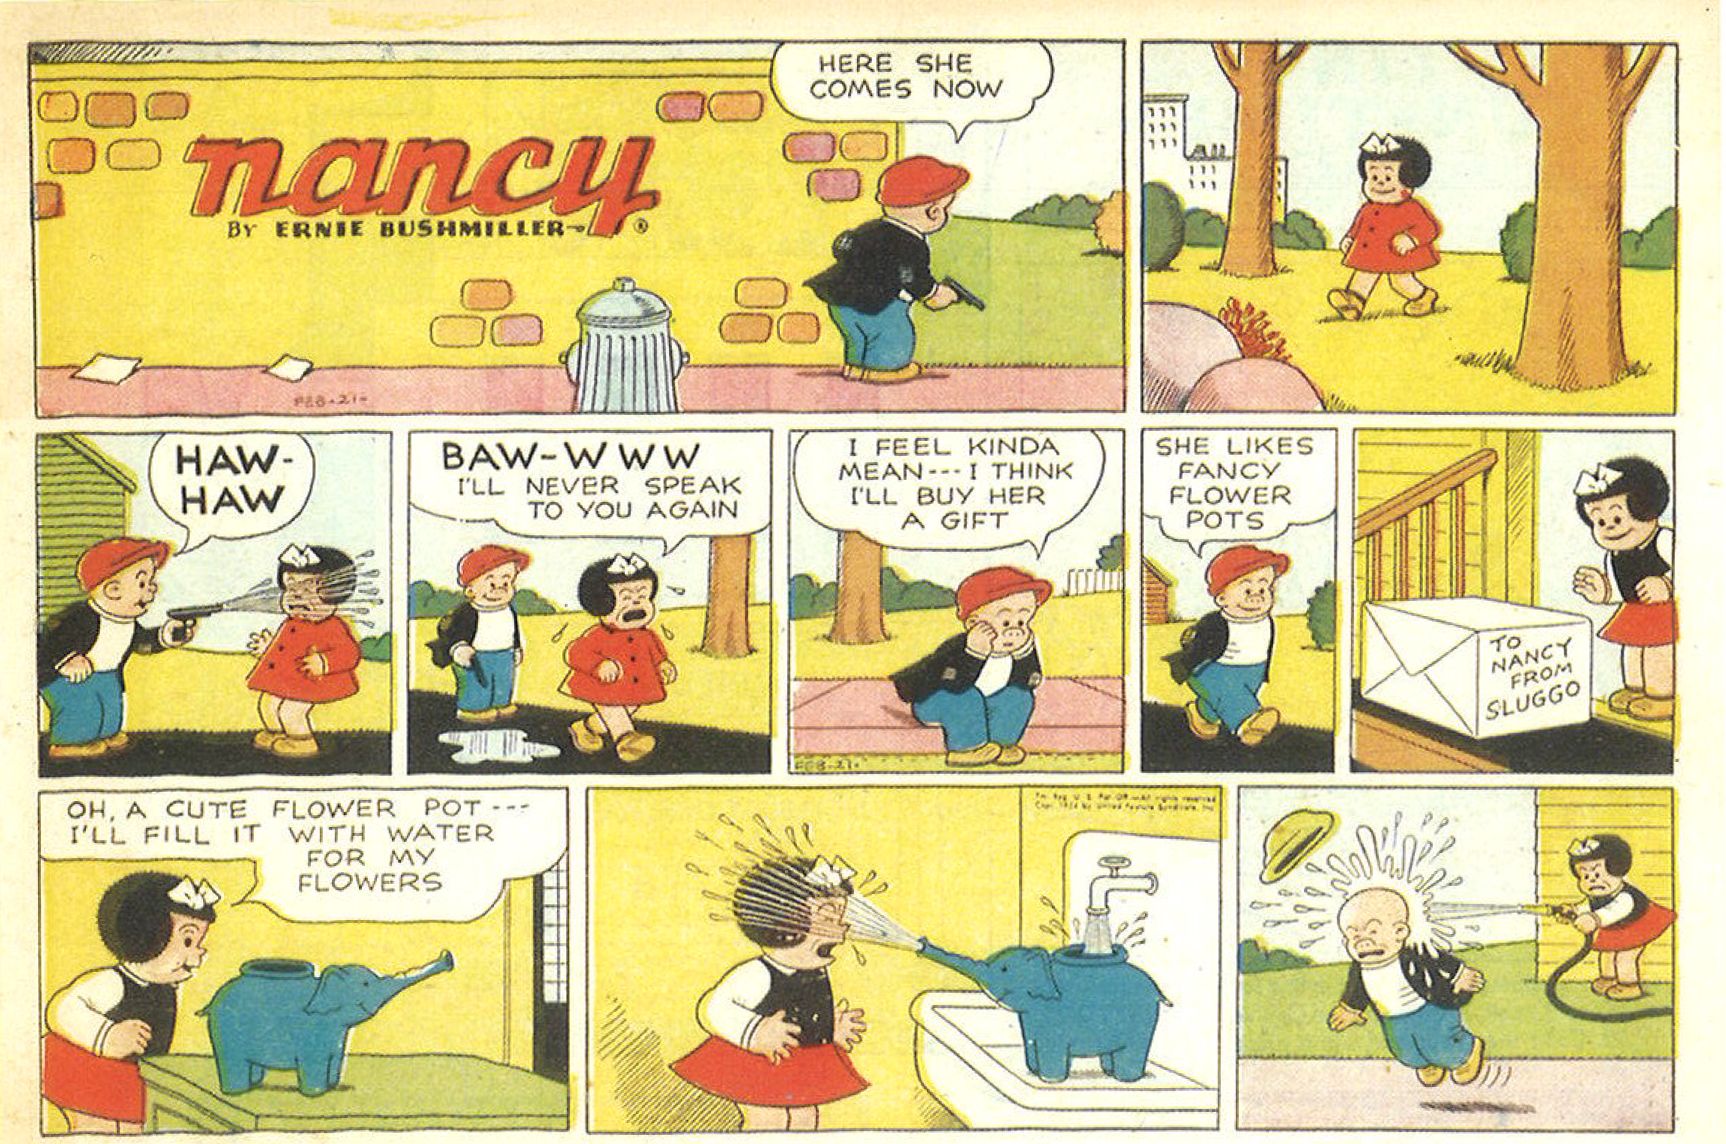 Sluggo buys Nancy an elephant watering pot as an apology for spraying her with a hose. It also sprays her in the face when she fills it, so she sprays him with the hose instead.